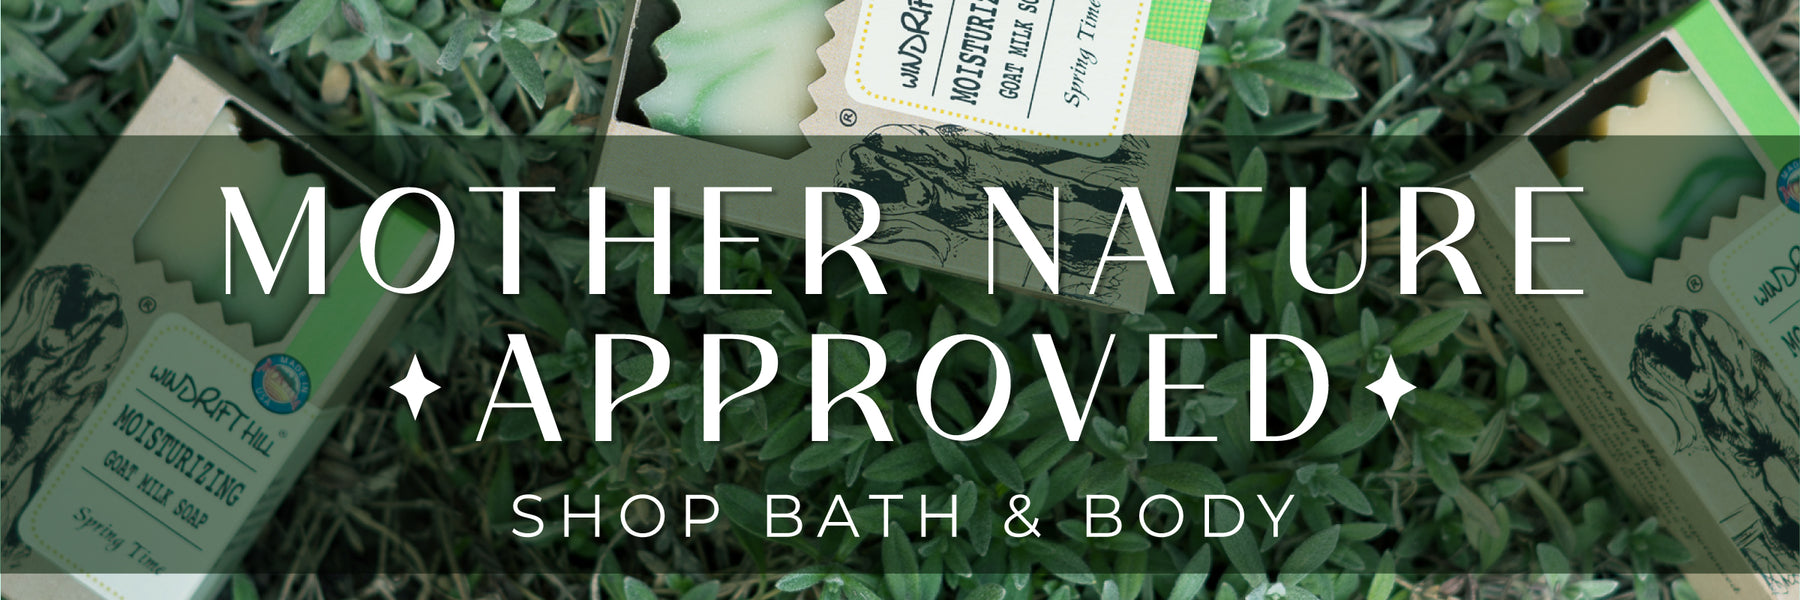 Mother Nature Approved Bath and Body